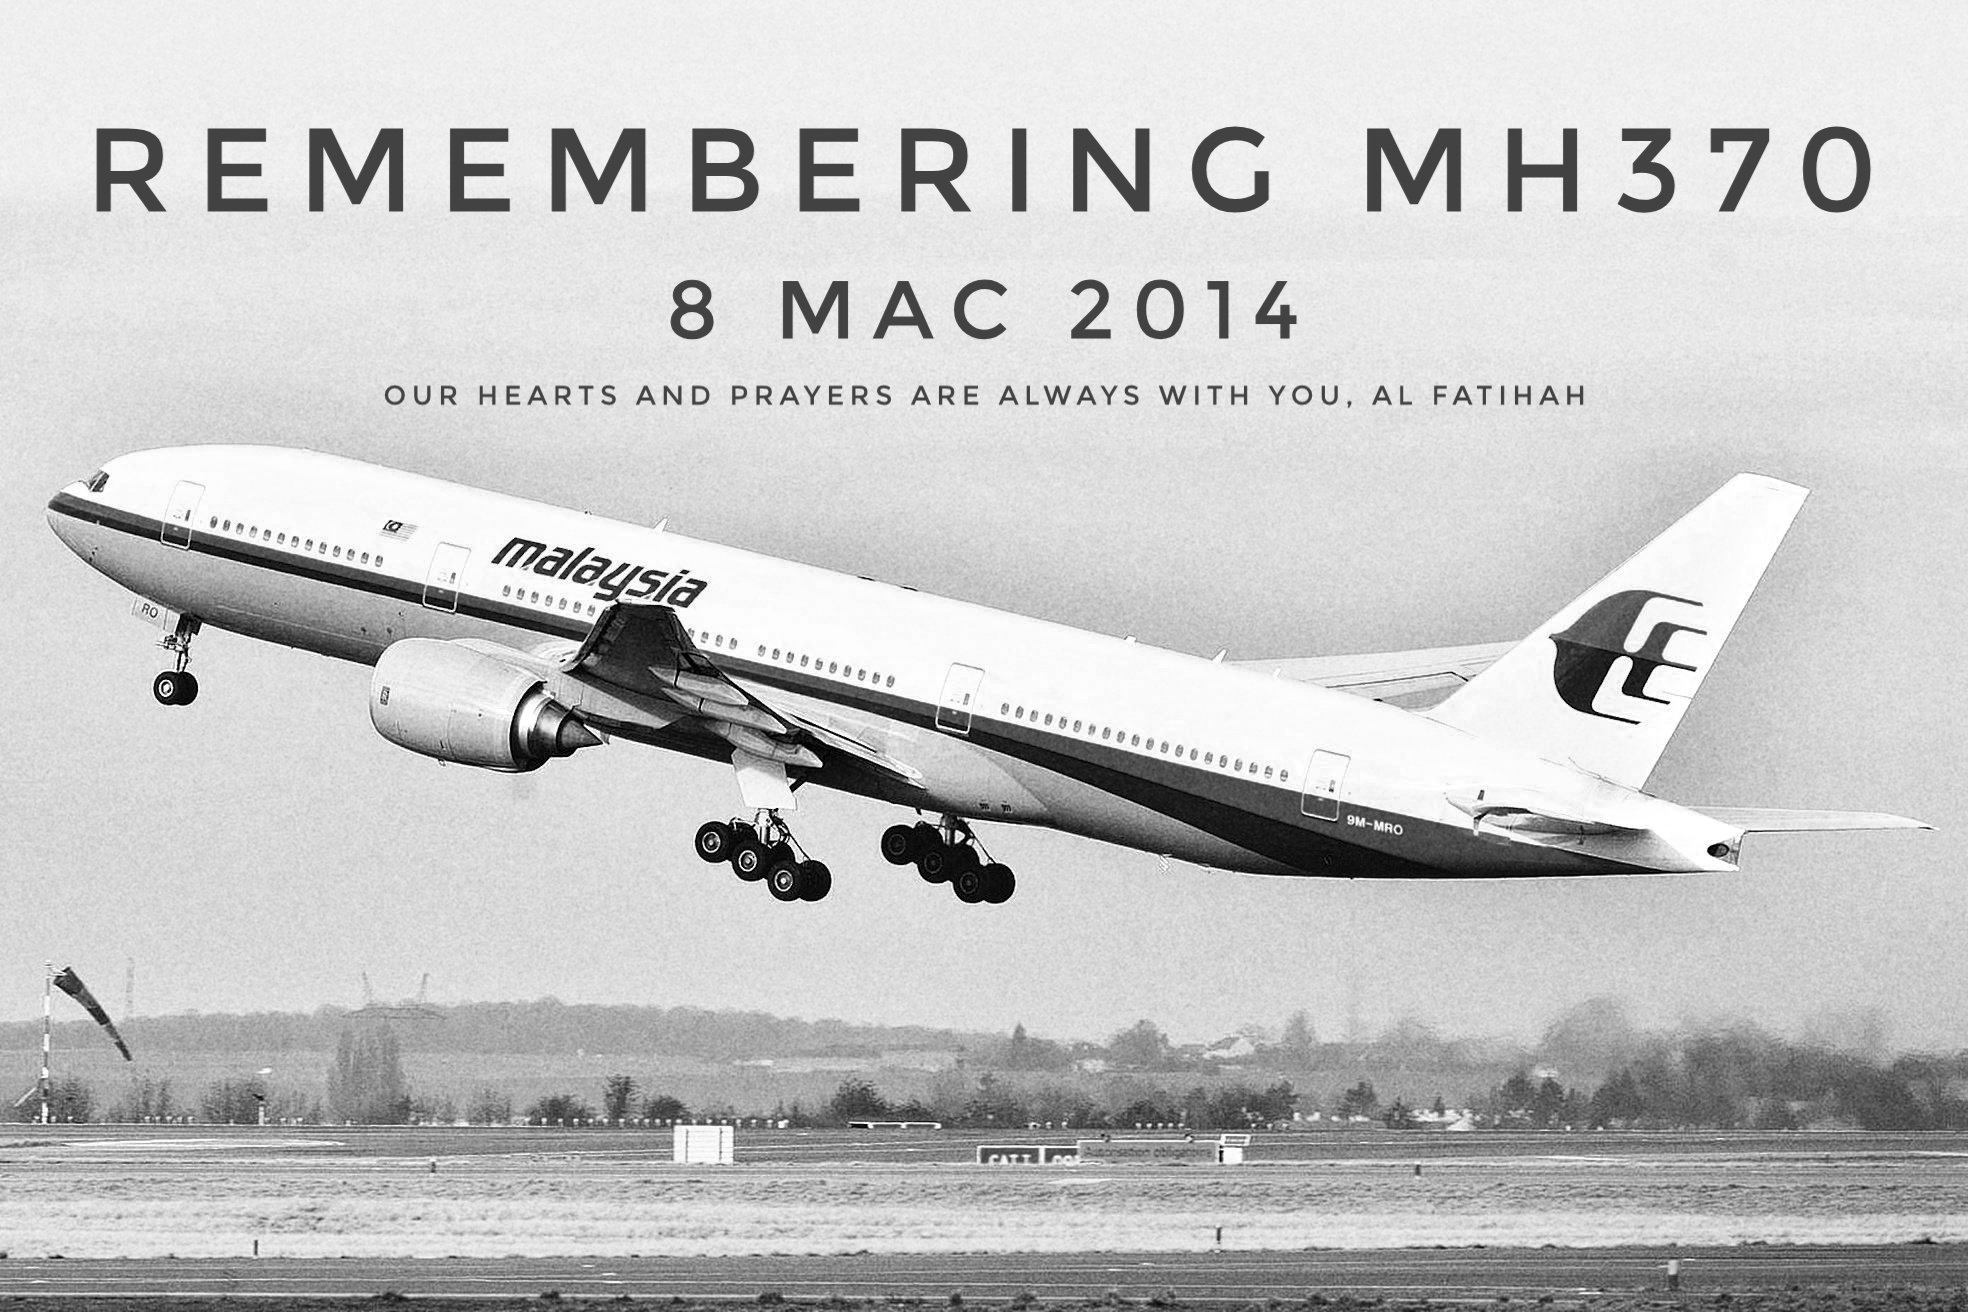 Remembering mh370